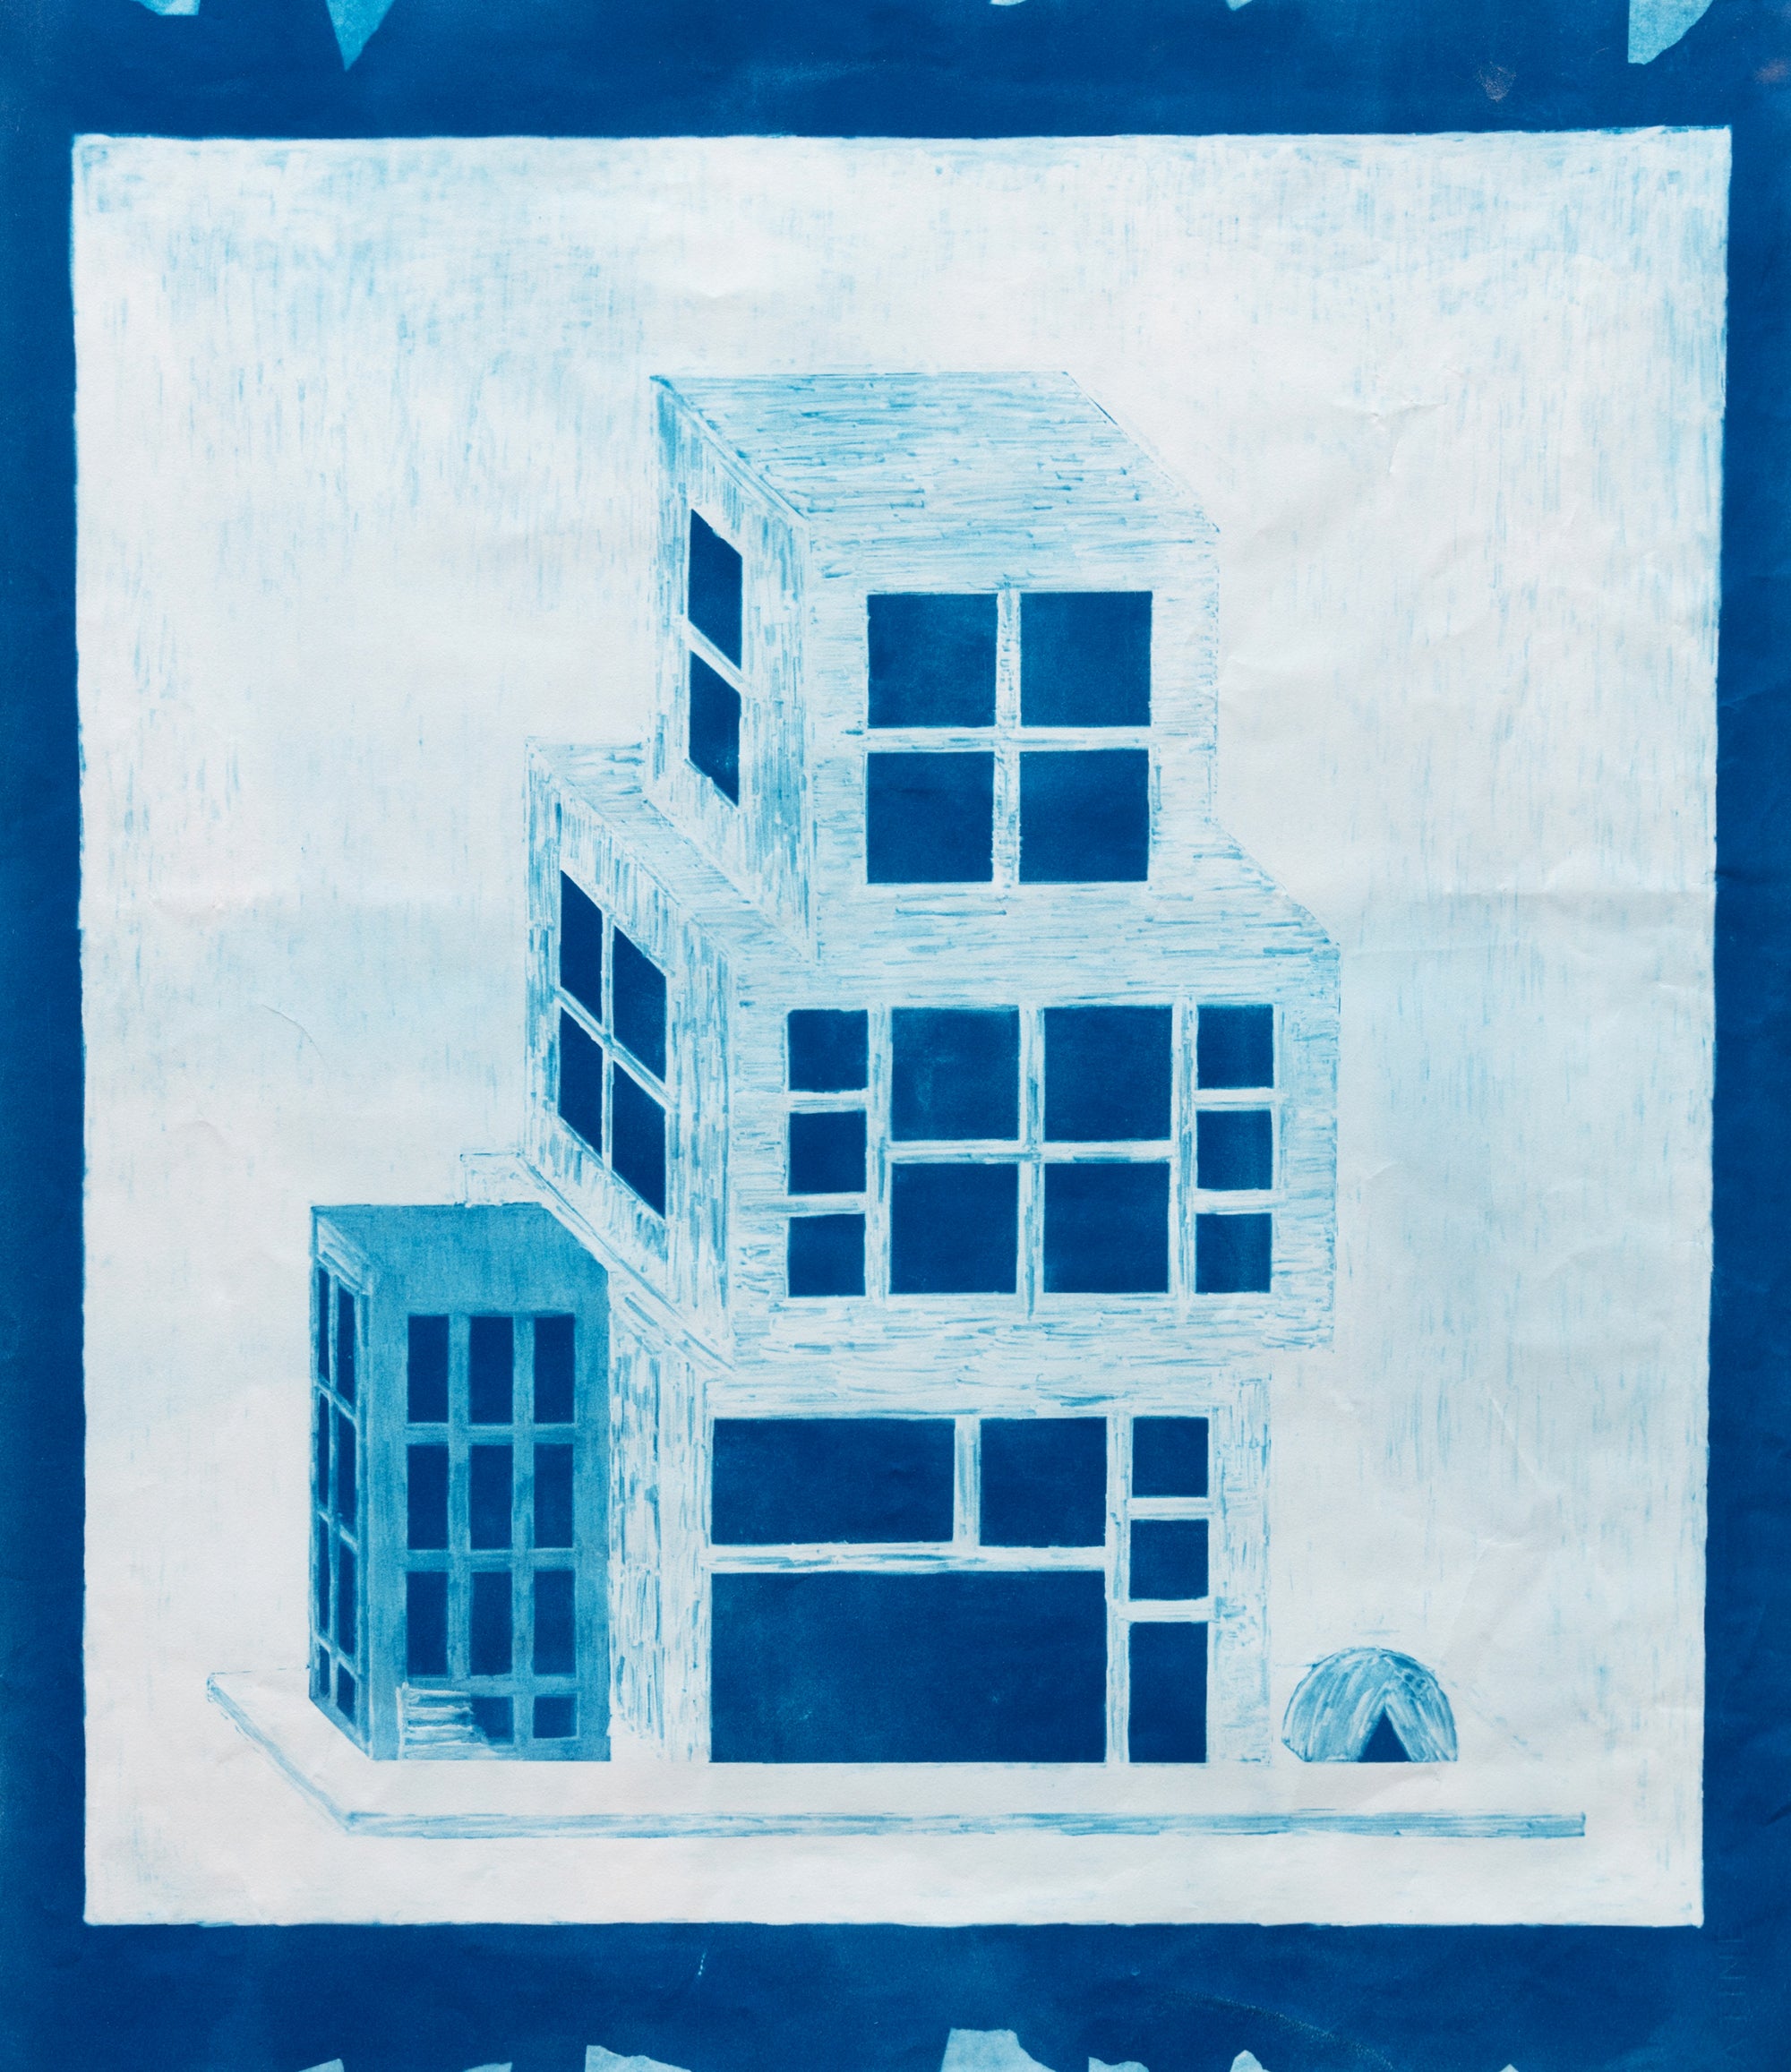 'CAPITAL CITY (COVER)' - Cyanotype on Paper